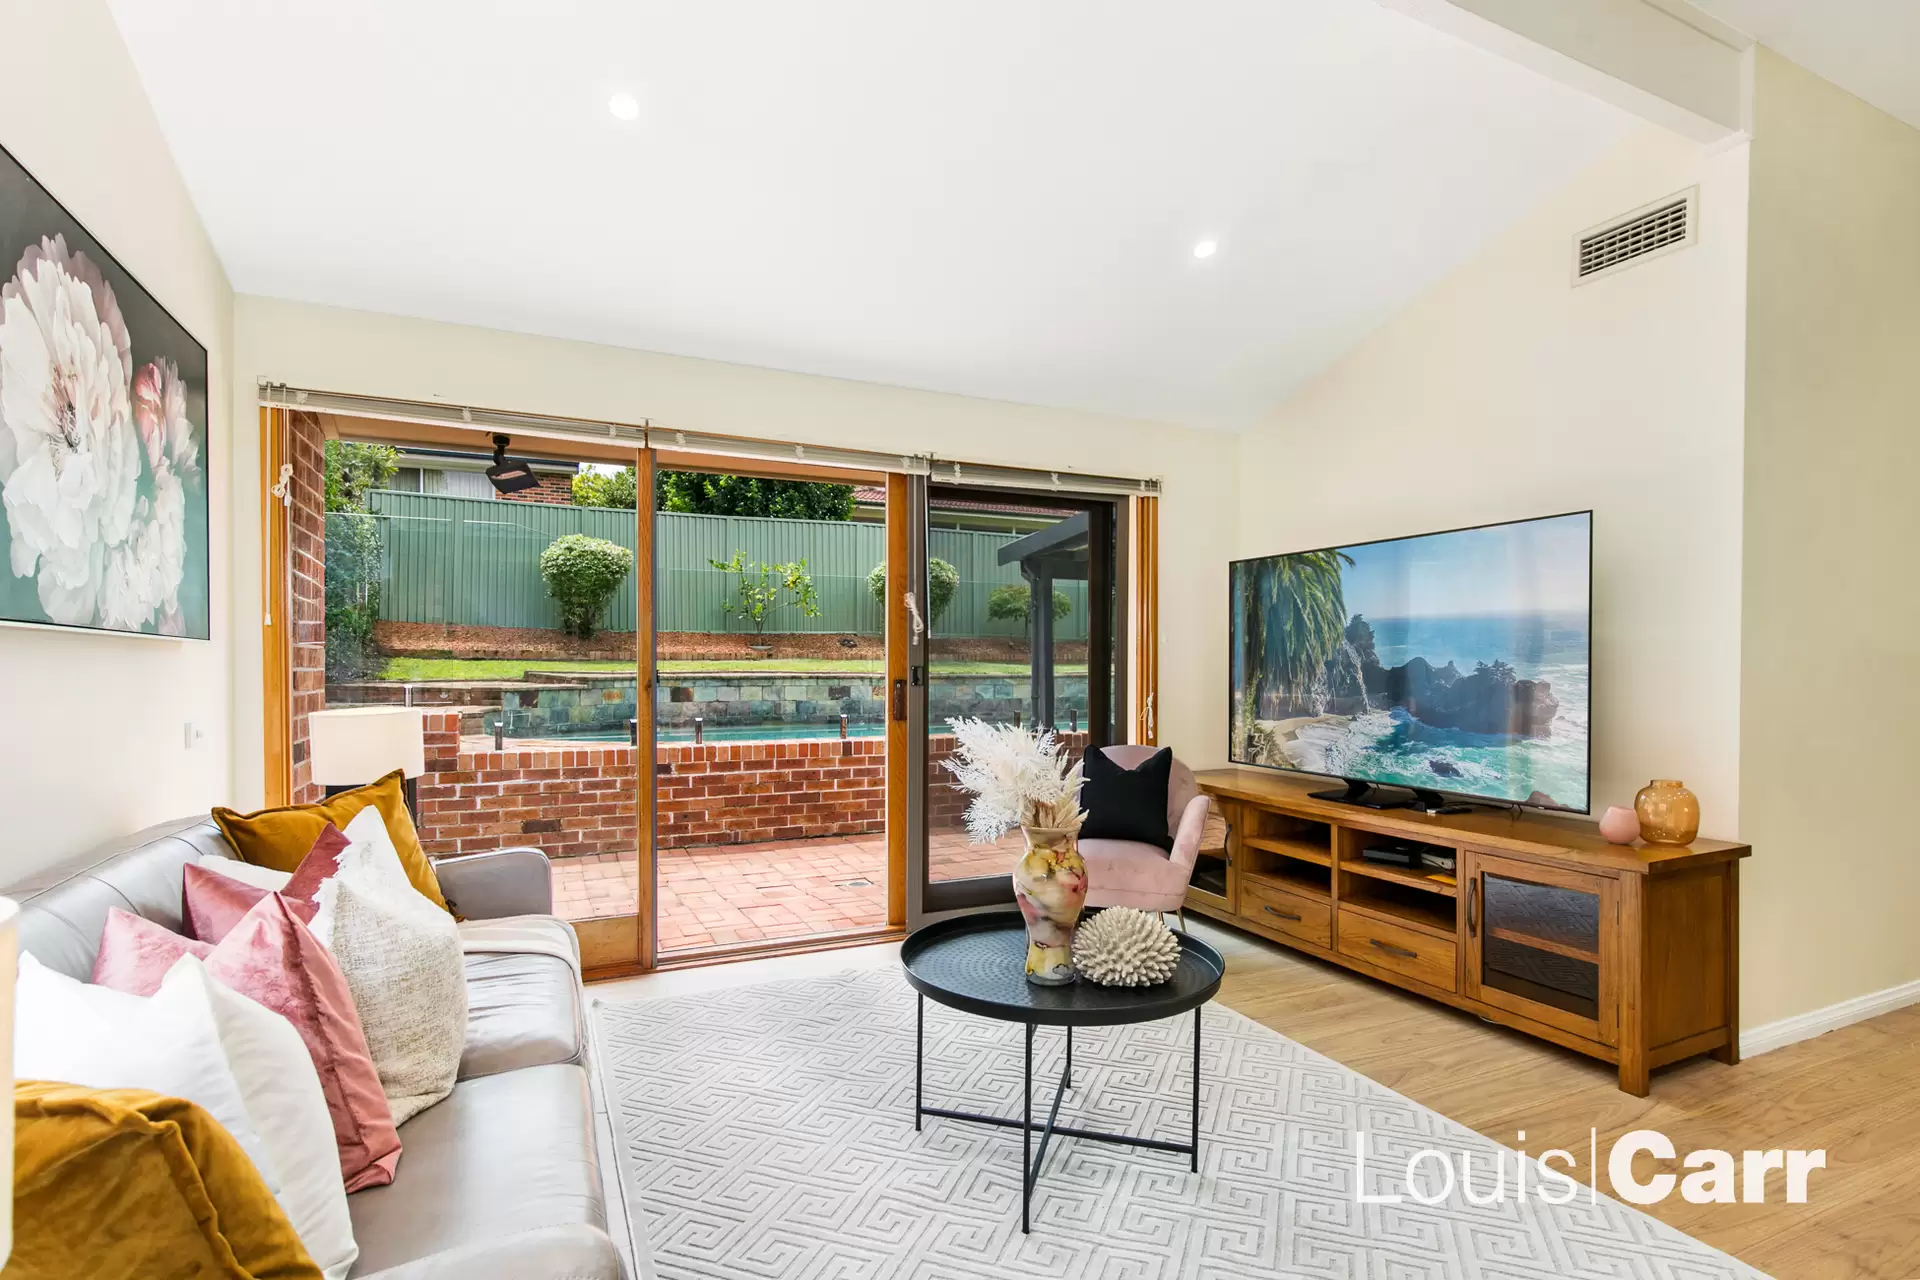 Photo #4: 165 Shepherds Drive, Cherrybrook - Auction by Louis Carr Real Estate